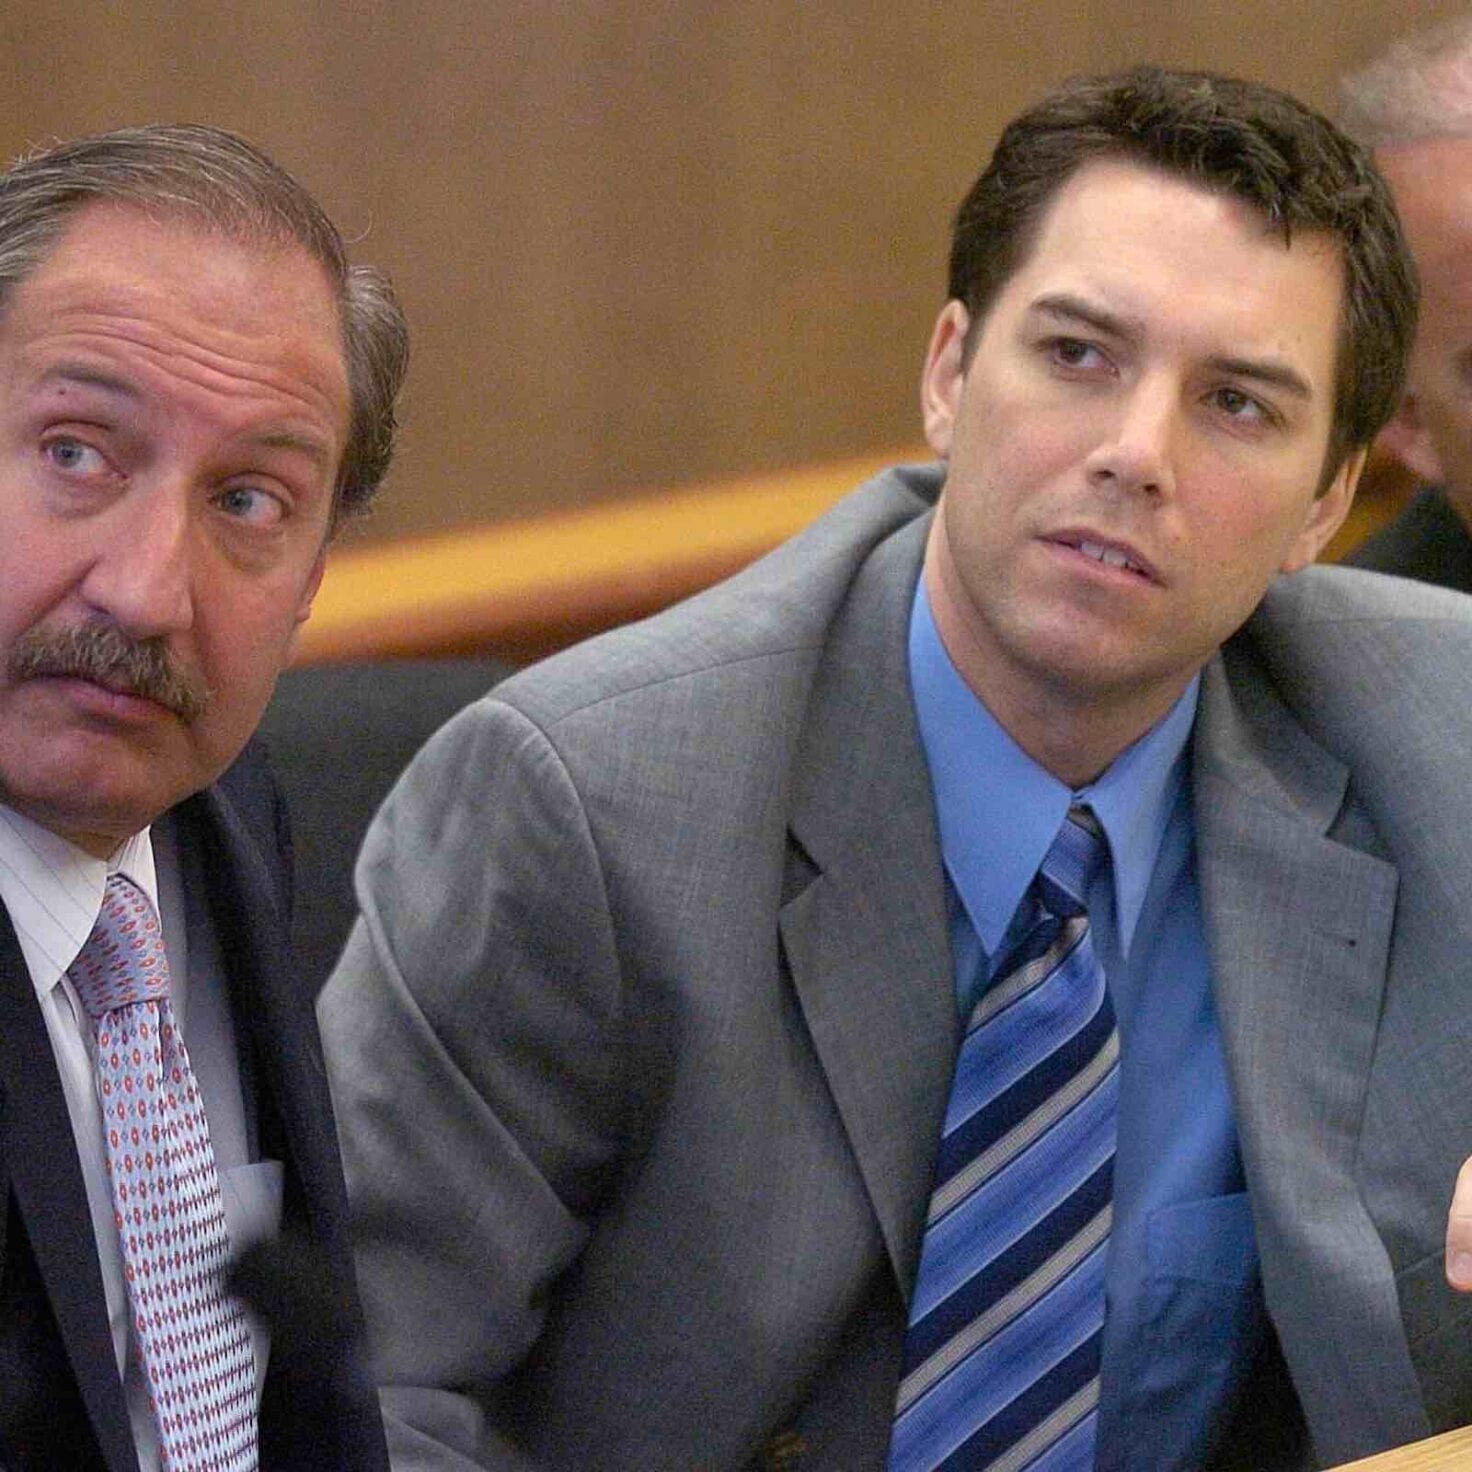 Is Scott Peterson innocent? Discover how he could walk free in 2020